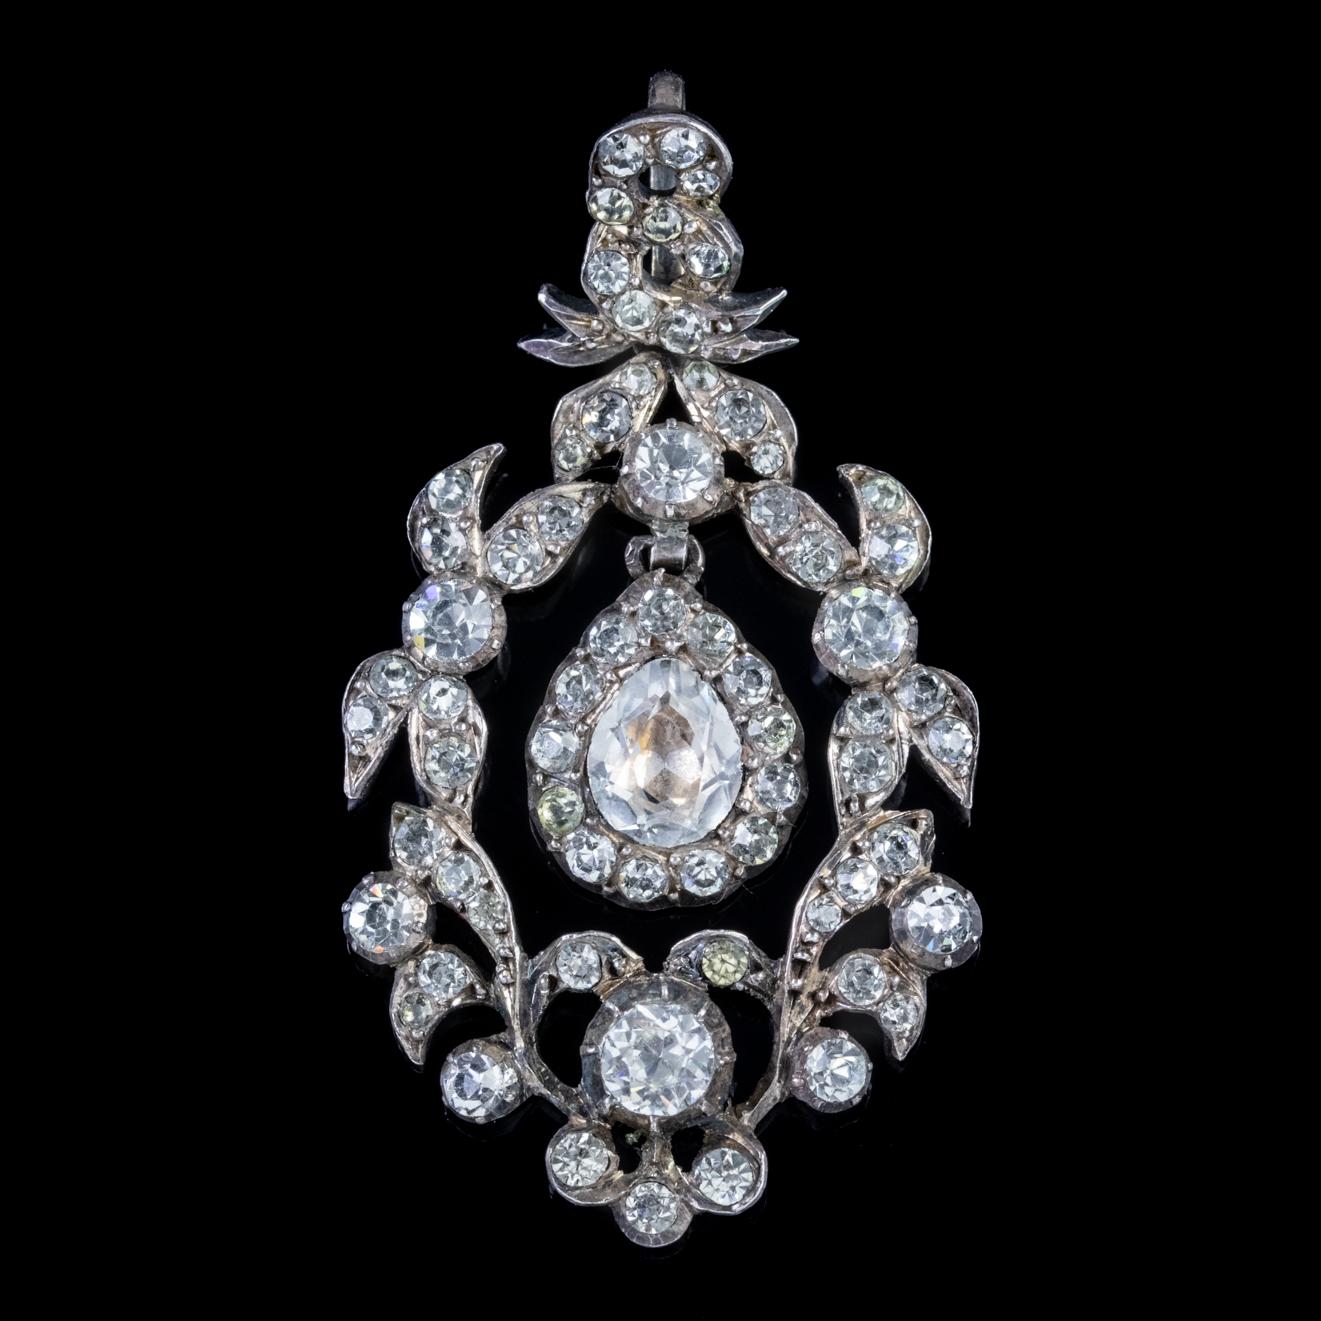 An exquisite antique pendant, beautifully preserved from the Georgian era and decorated with sparkling white Paste Stones with a fabulous swinging teardrop dropper at its heart with a larger foil backed Paste in the centre. 

Paste is a transparent